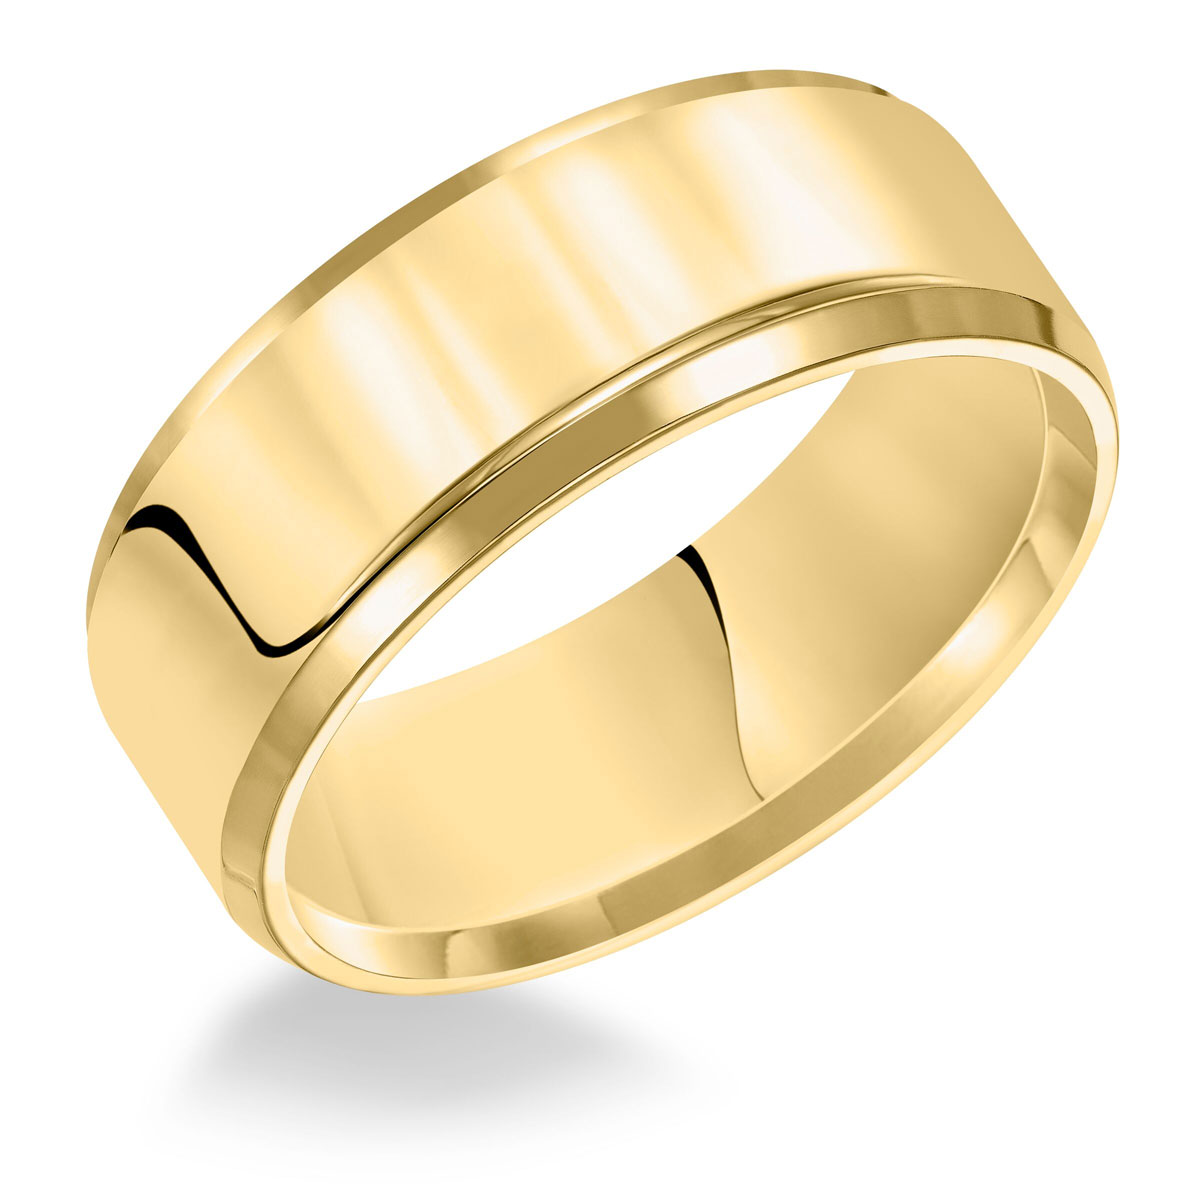 8 mm Flat Wedding Band with Beveled Edge in Yellow Gold, Size 9.5 ...